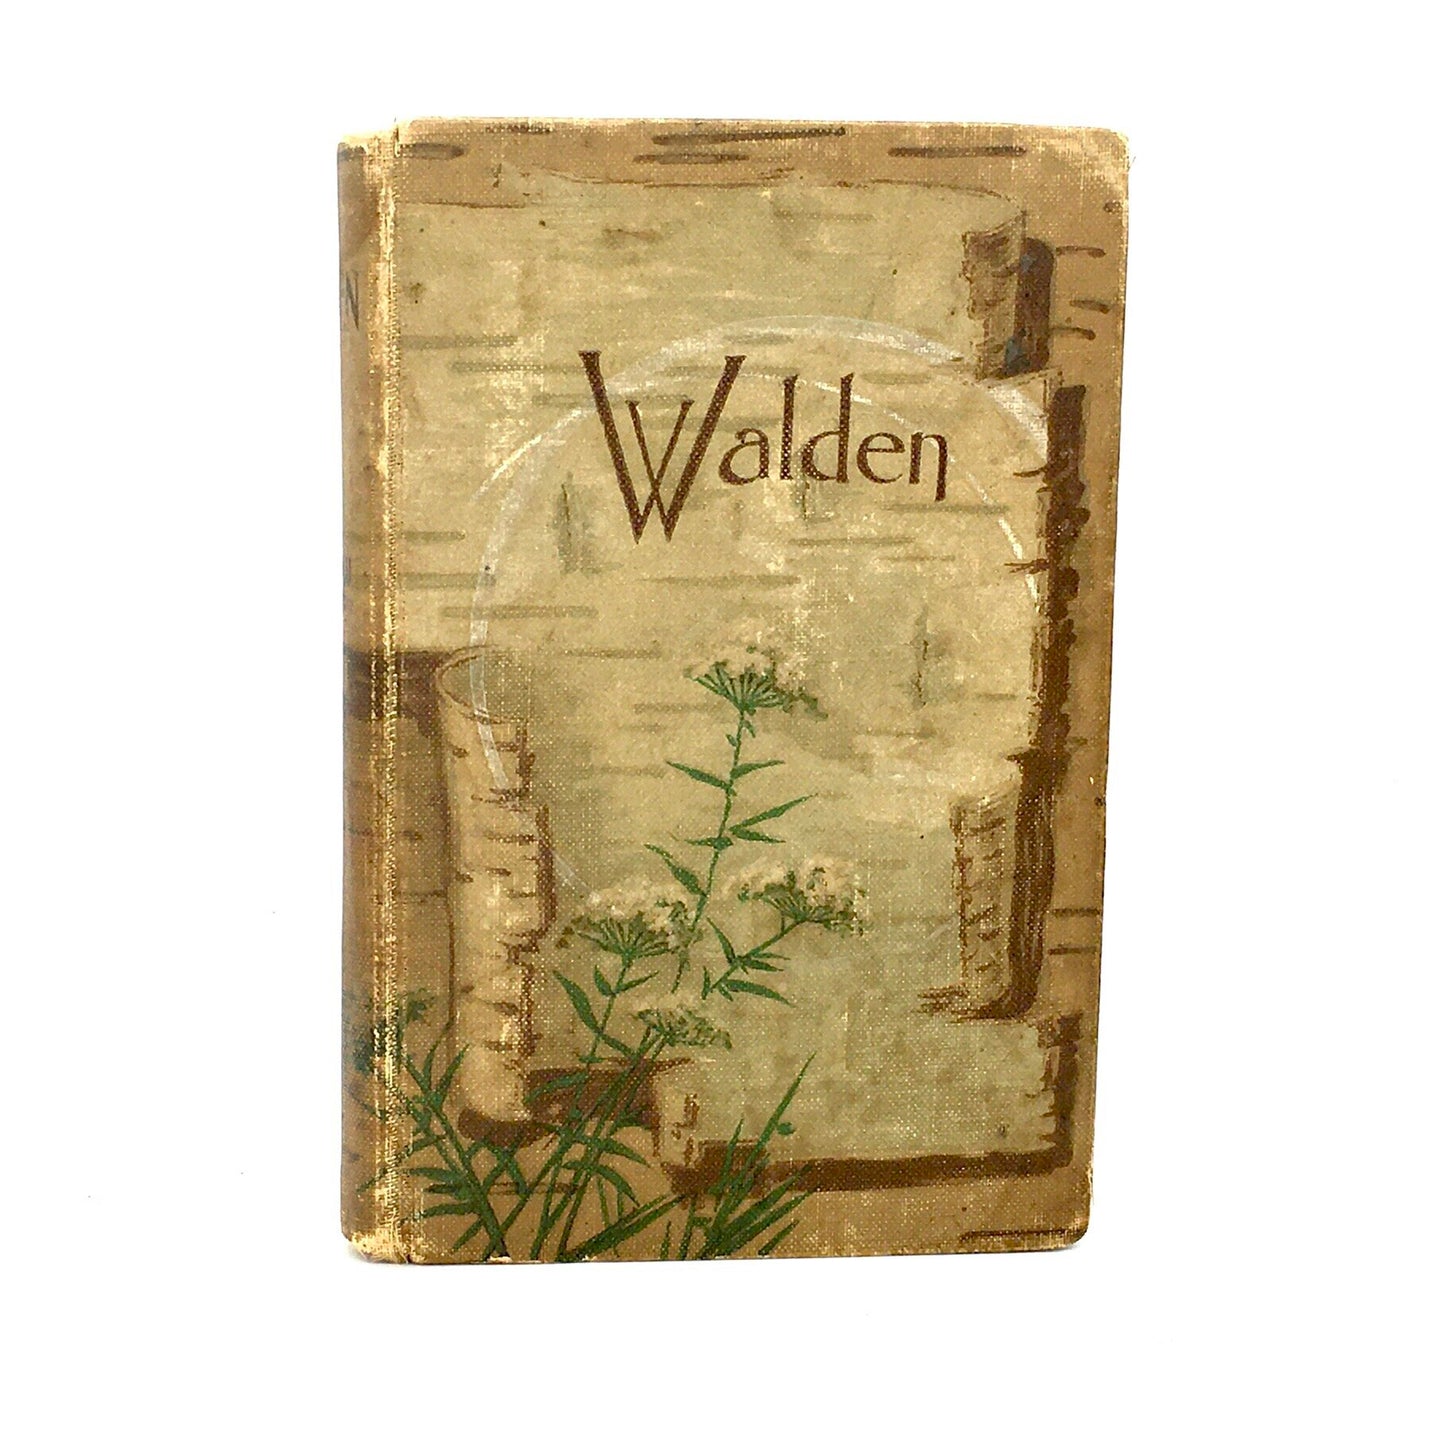 THOREAU, Henry David "Walden" [T.Y. Crowell & Co, 1899] - Buzz Bookstore